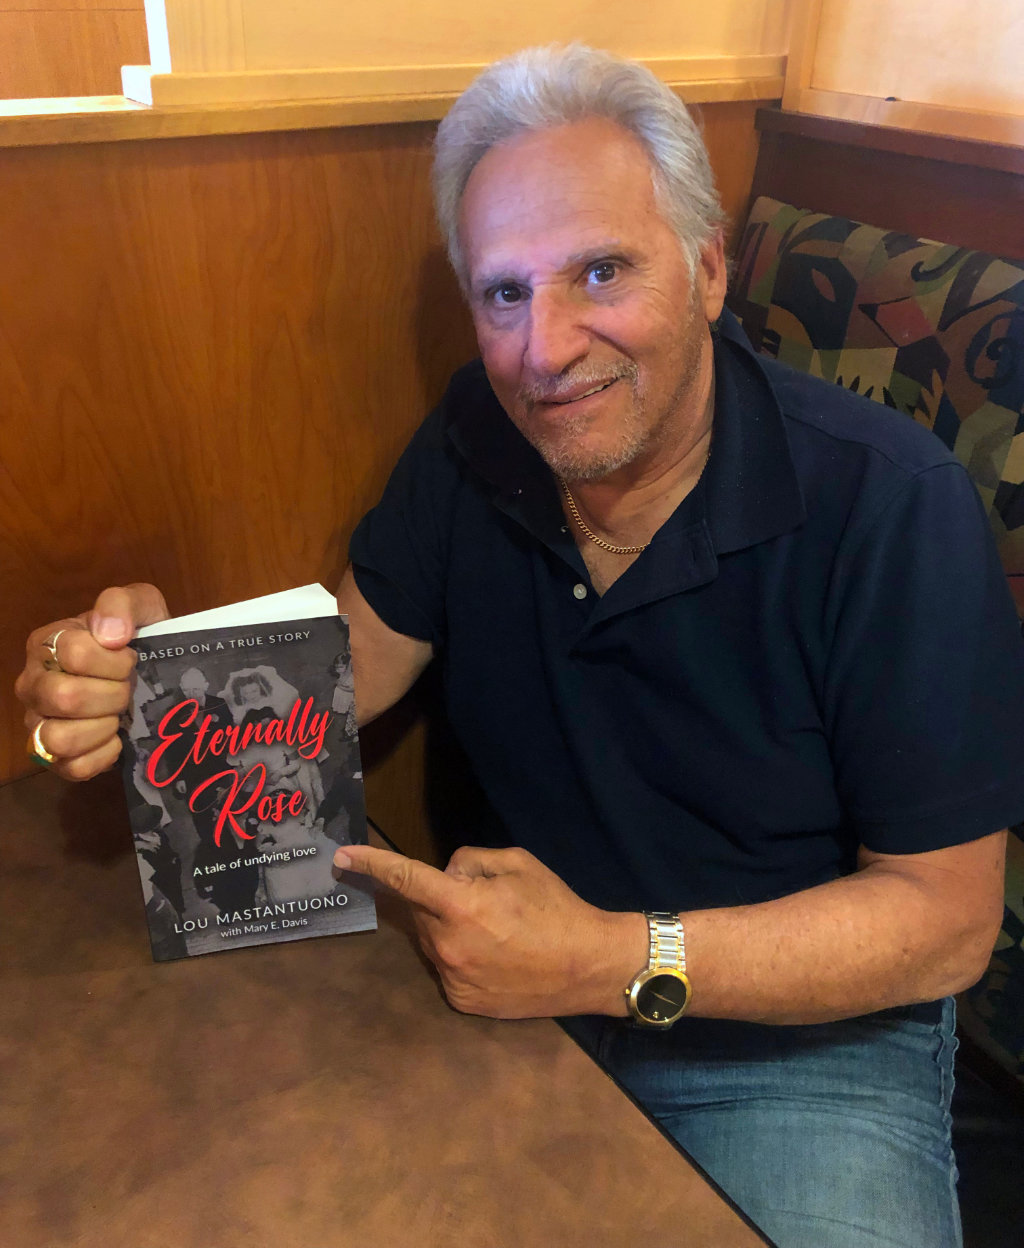 Lou Mastantuono, Wantagh resident and author, with his book, "Eternally Rose".